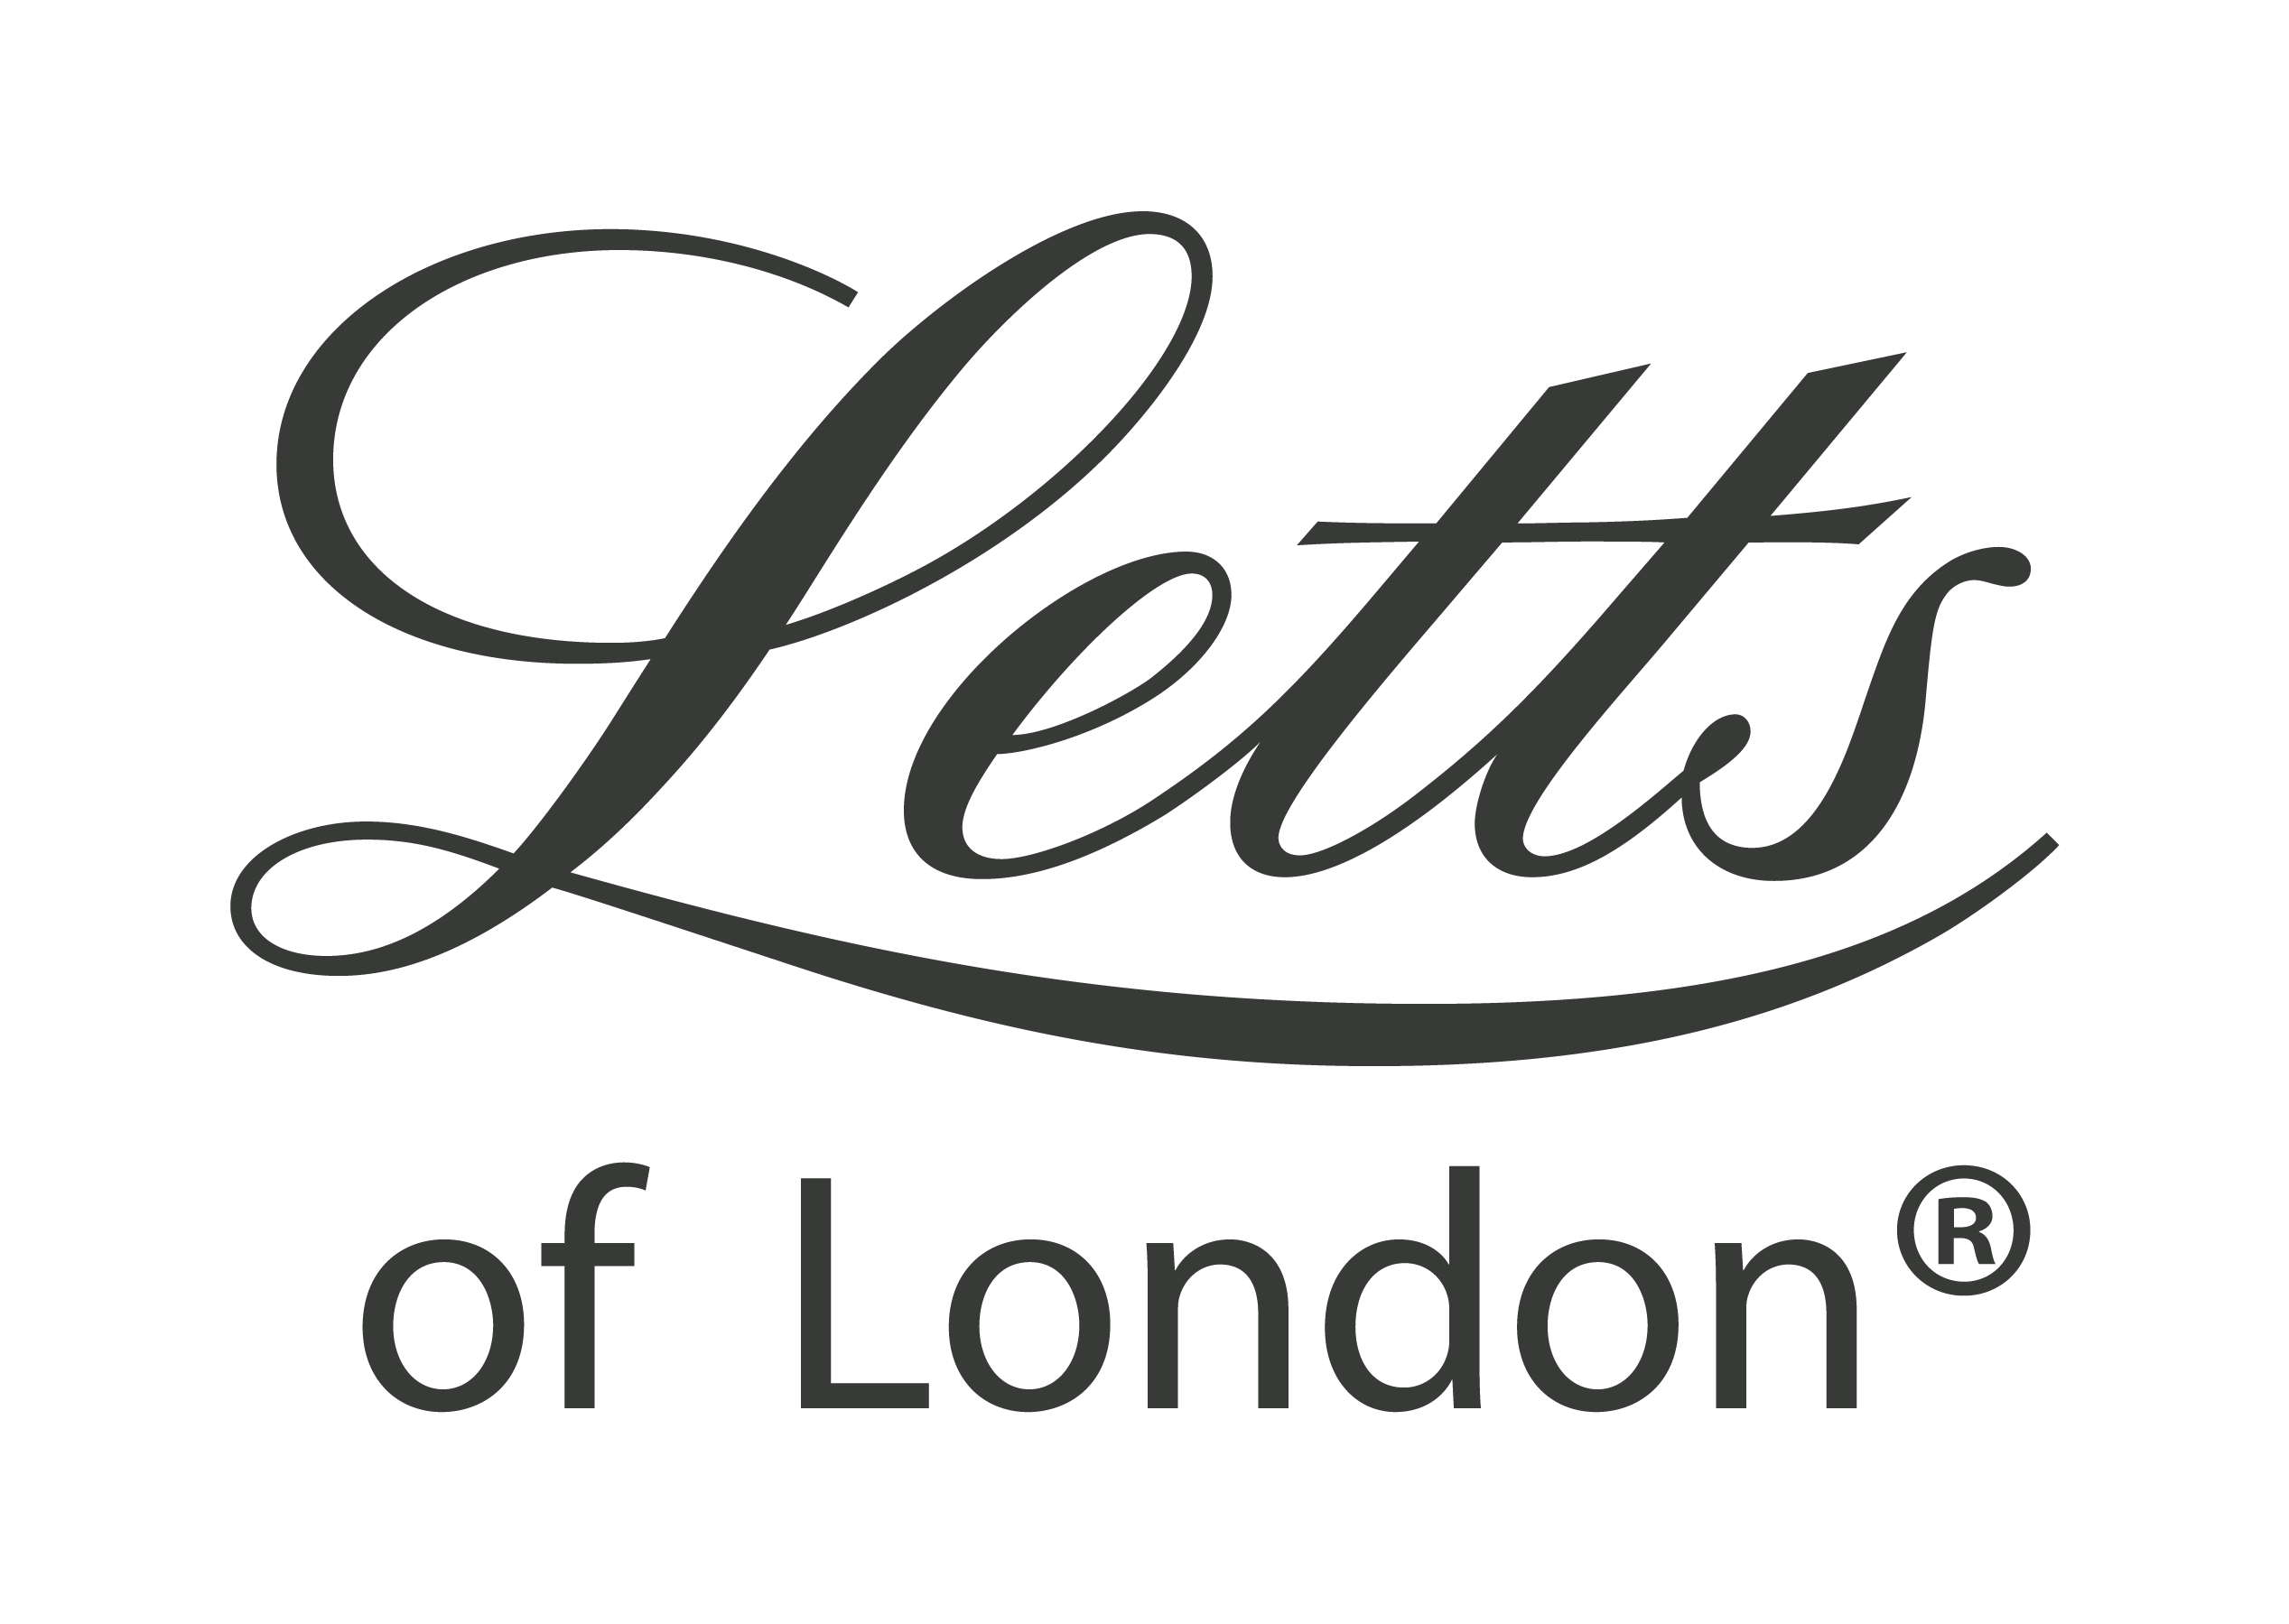 Letts of London